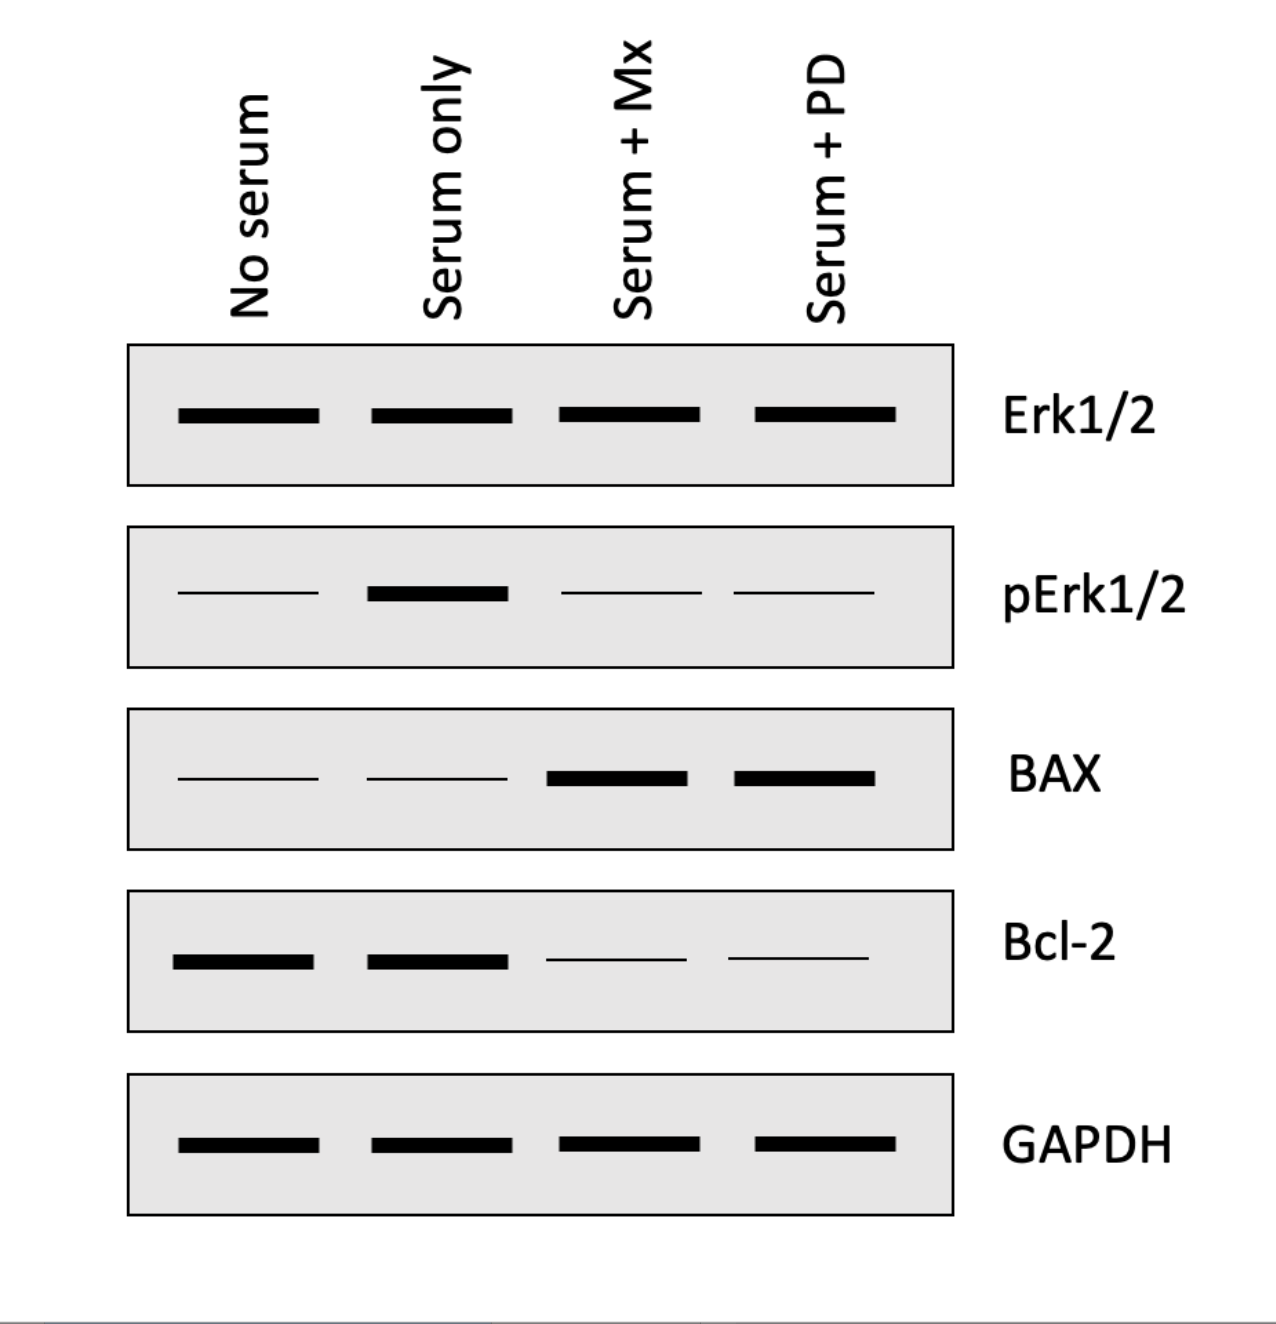 <p>The following four questions refer to the Western blot below that investigated how a chemotherapeutic drug methotrexate (Mx) impacts the activation of the ERK1/2 and apoptosis pathways in HeLa cells (malignant cervical cancer cells).  Cells were either serum starved (no serum) or grown in serum containing media with or without PD184352 (PD; ERK1/2 inhibitor) or Mx.</p><p></p><p>In what cells is the ERK1/2 pathway activated?  One or more may be correct, so select all that apply:</p><ol><li><p>Choice 1 of 4:No serum</p></li><li><p>Choice 2 of 4:Serum + Mx</p></li><li><p>Choice 3 of 4:Serum only</p></li><li><p>Choice 4 of 4:Serum + PD</p></li></ol>